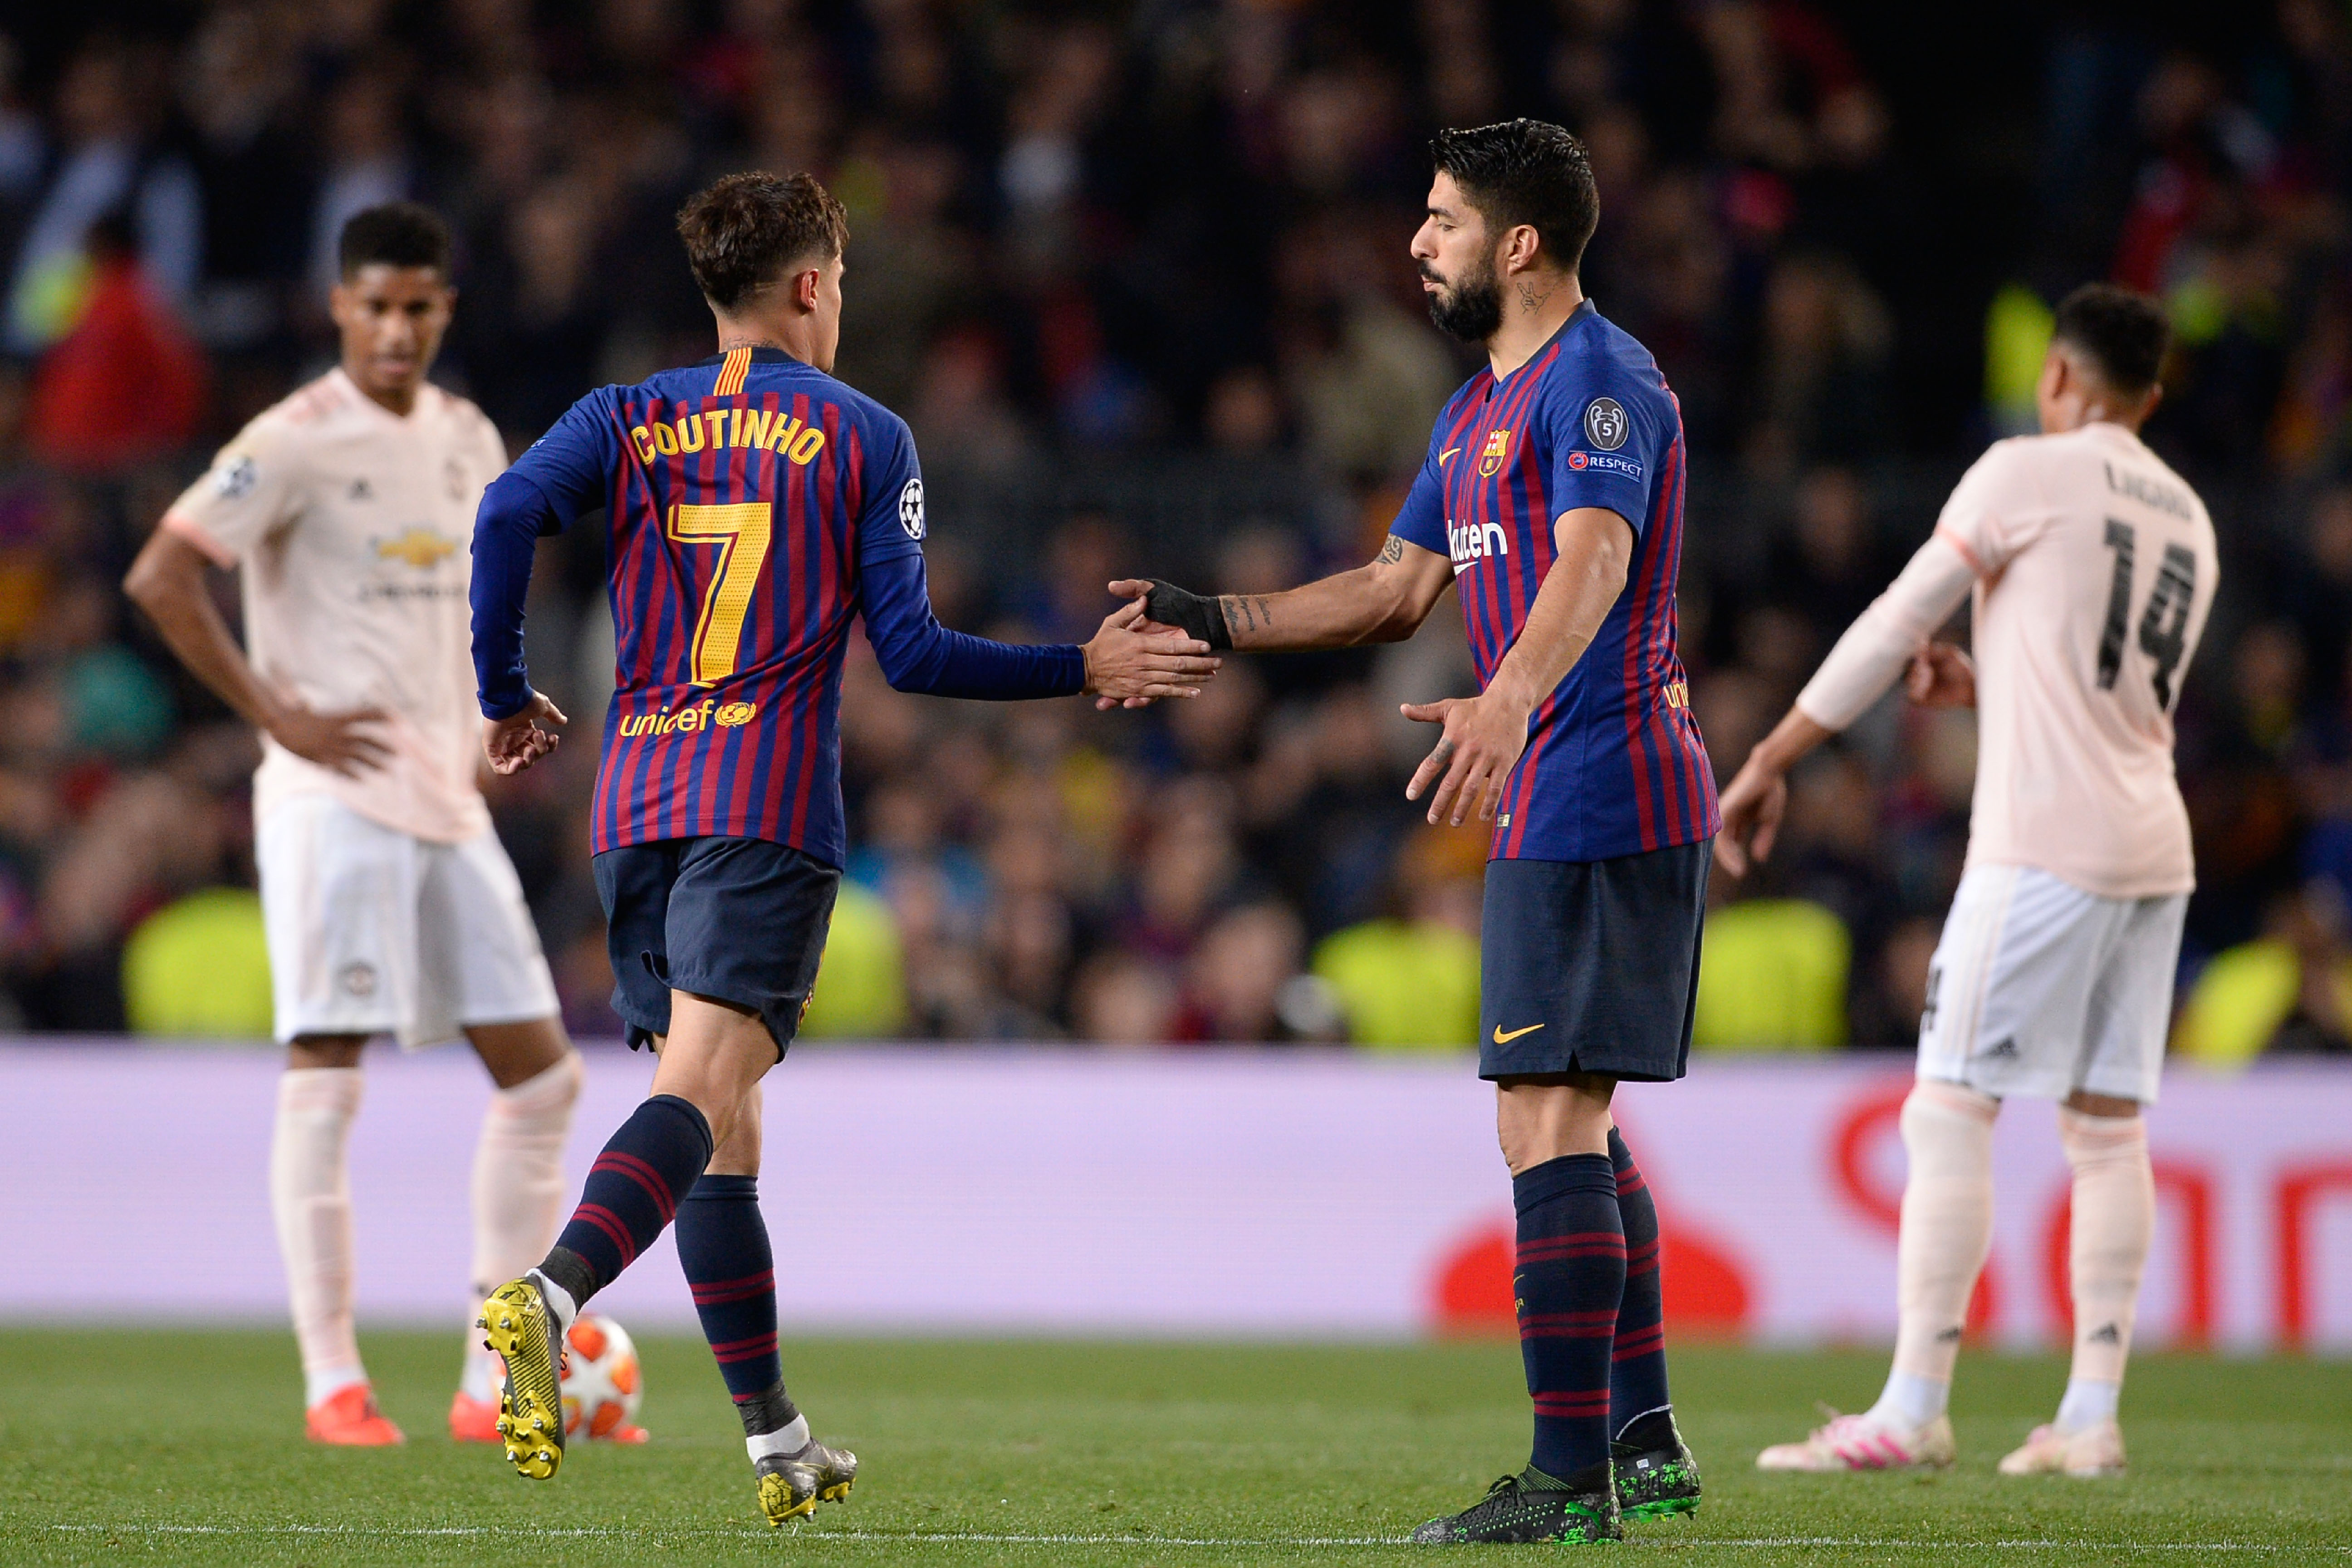 Barcelona's Brazilian midfielder Philippe Coutinho (L) celebrates with Barcelona's Uruguayan forward Luis Suarez after scoring during the UEFA Champions League quarter-final second leg football match between Barcelona and Manchester United at the Camp Nou stadium in Barcelona on April 16, 2019. (Photo by PAU BARRENA / AFP)        (Photo credit should read PAU BARRENA/AFP/Getty Images)